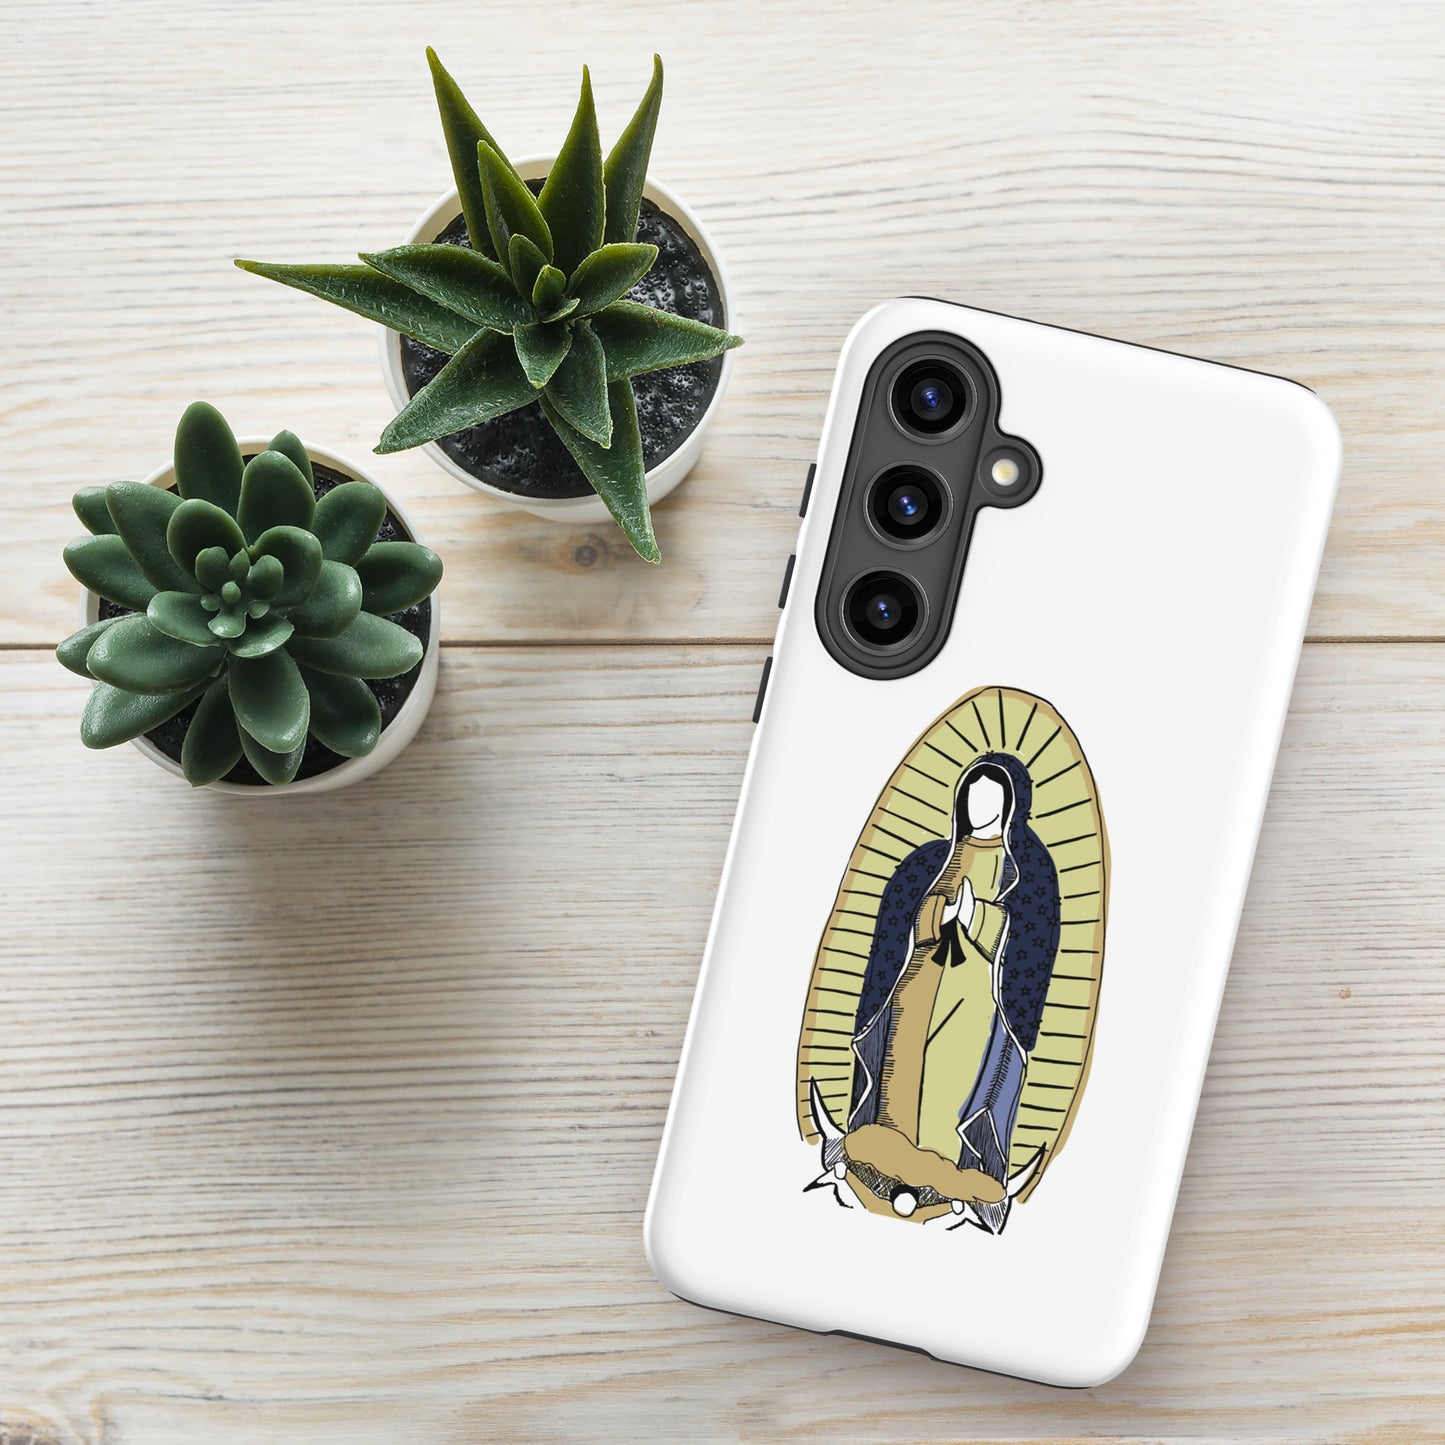 "Our Lady of Guadalupe" - Samsung Case